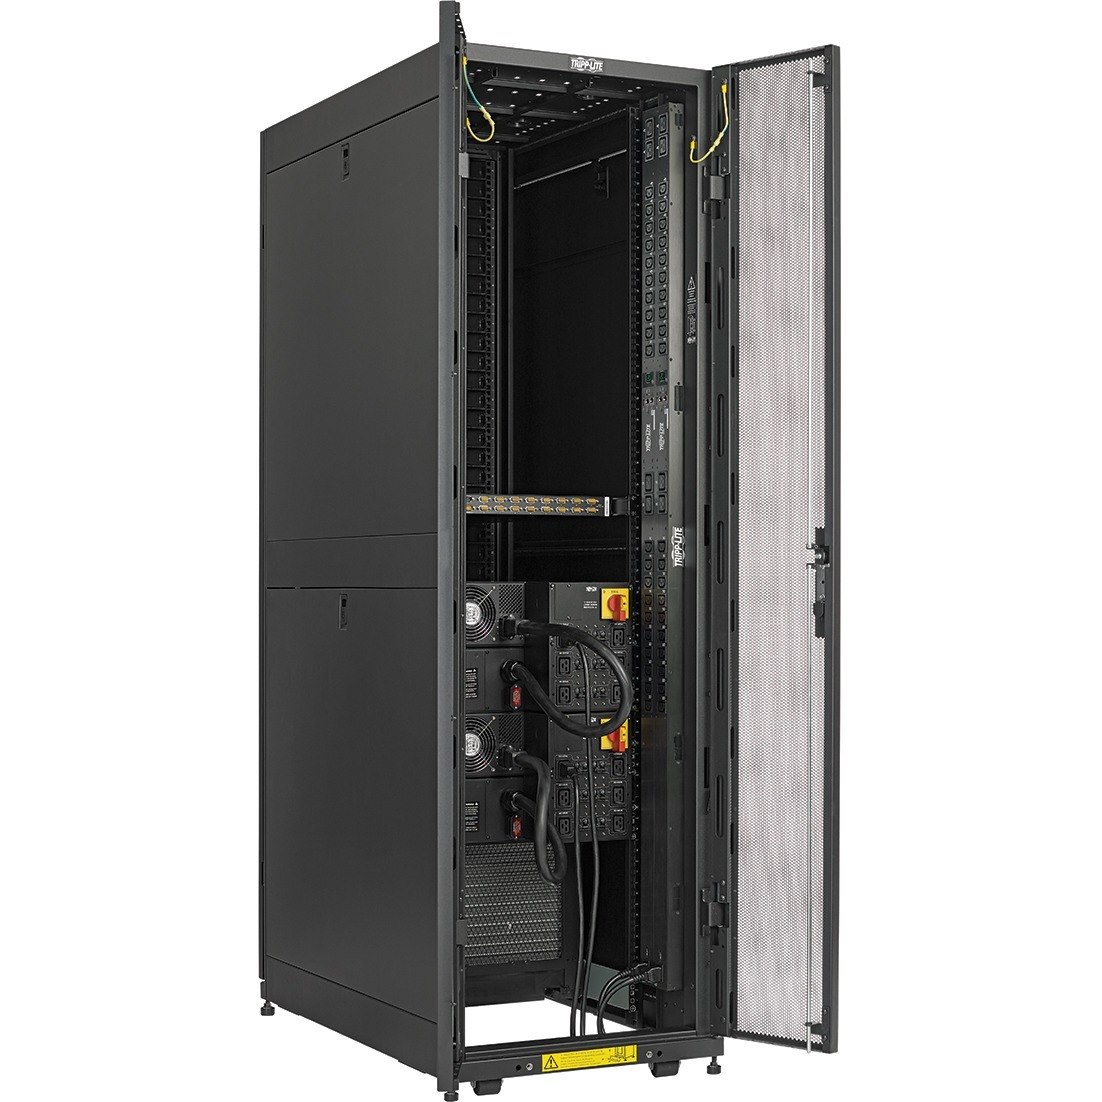 Tripp Lite by Eaton EdgeReady&trade; Micro Data Center - 36U, 10 kVA UPS, Network Management and Dual PDUs, 208/240V or 230V Kit